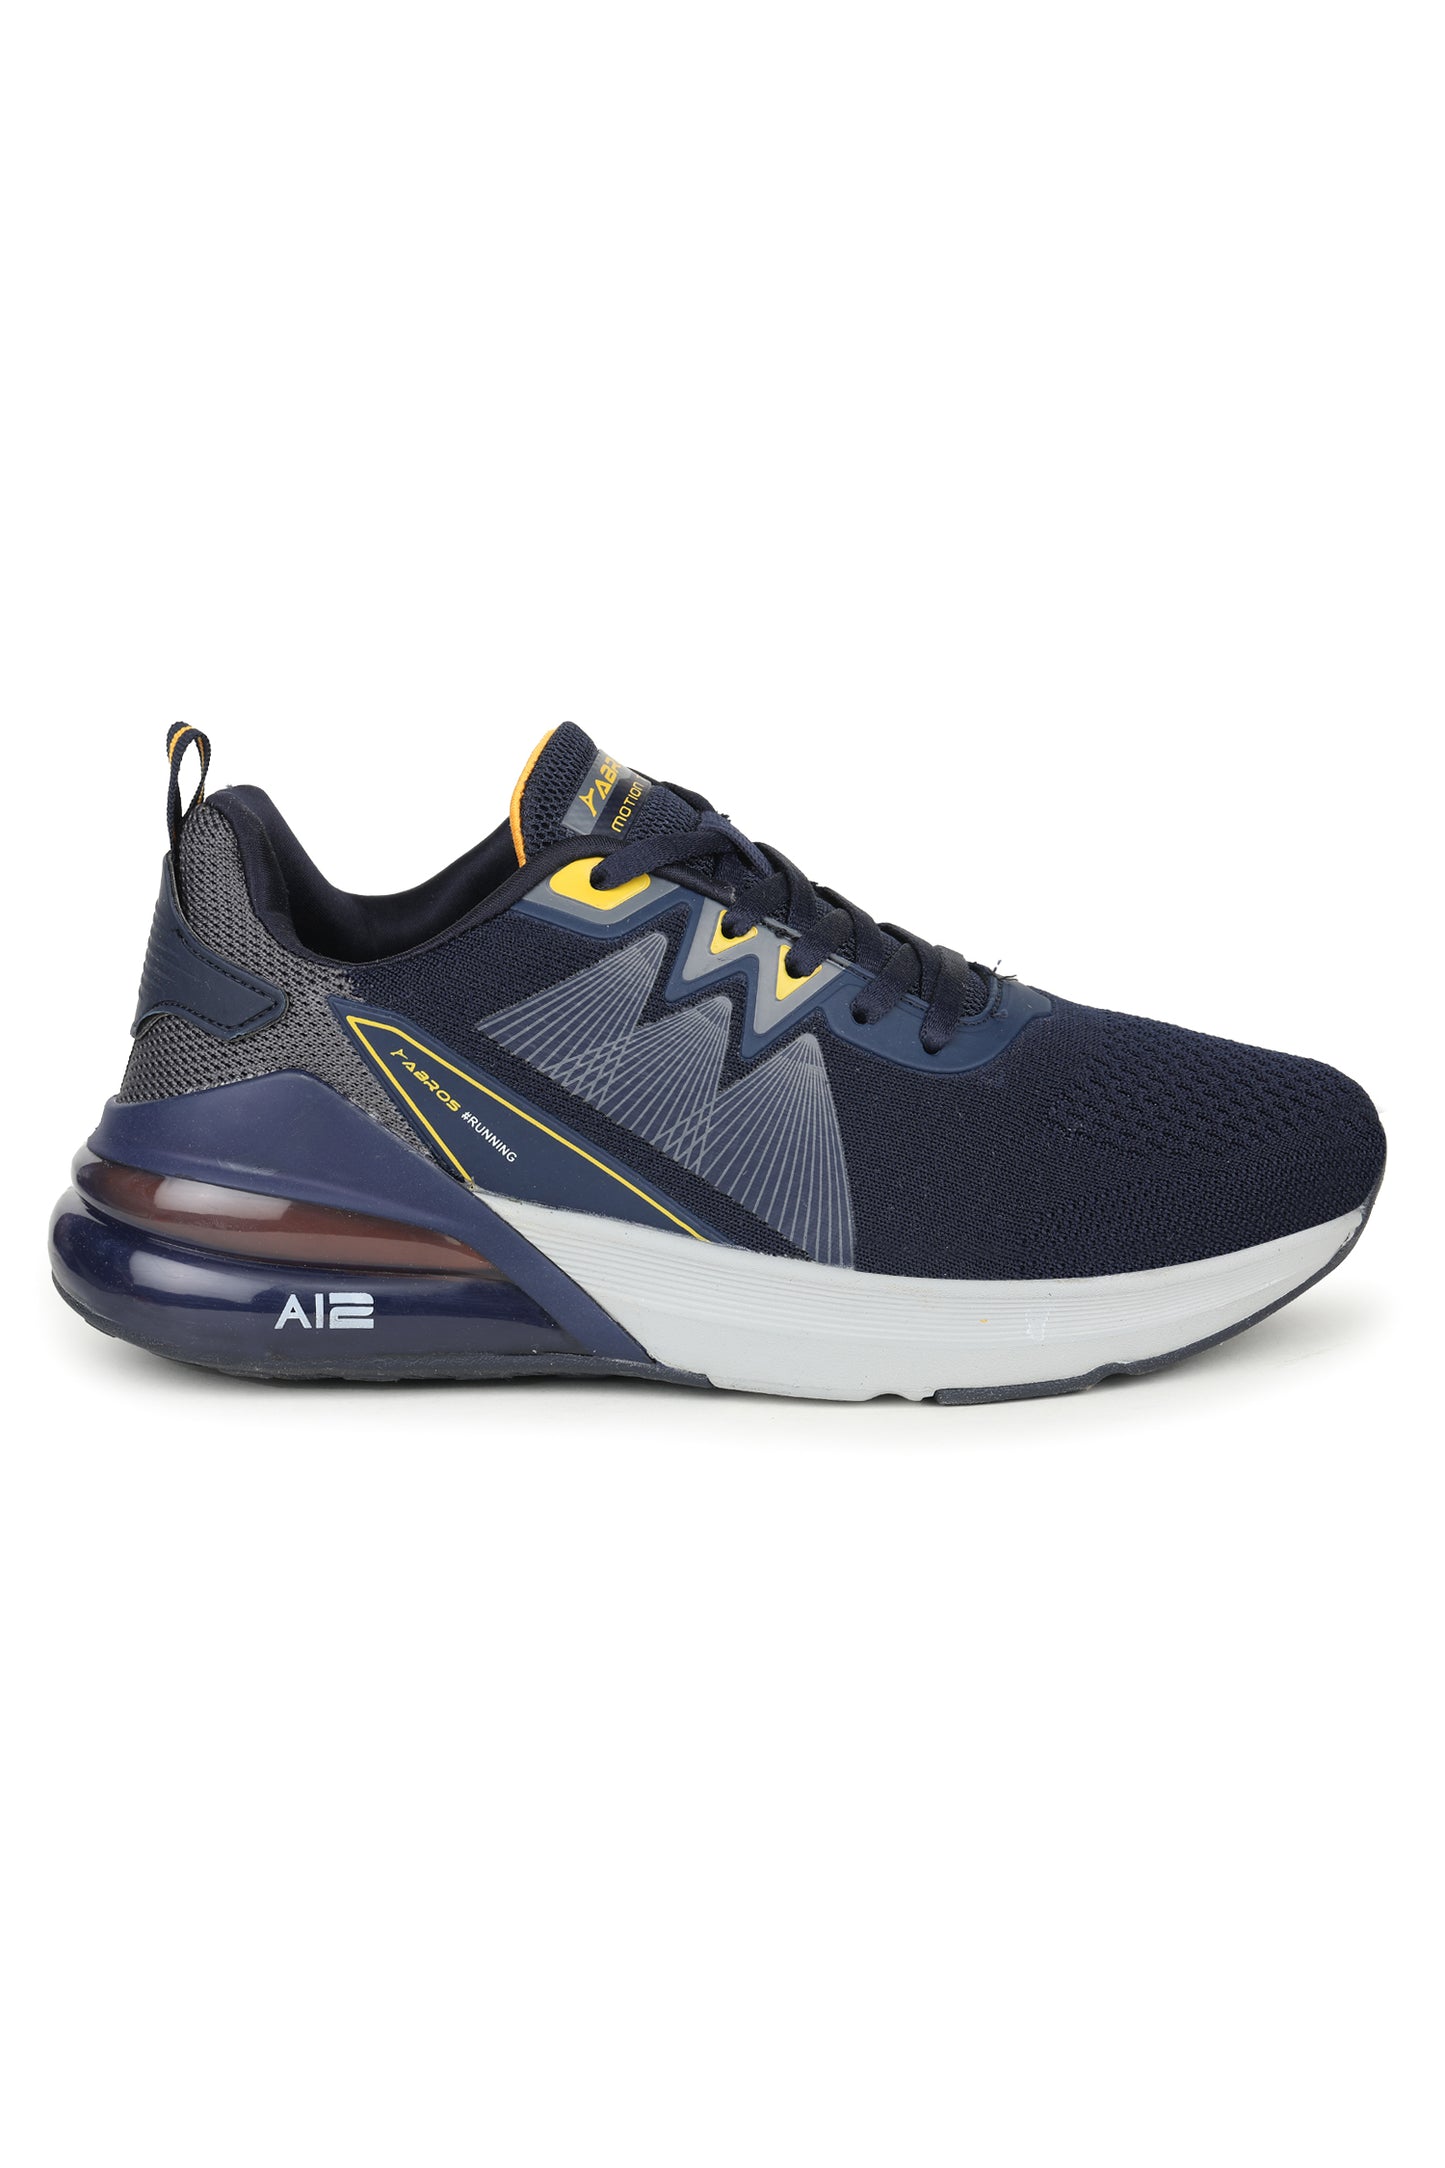 ABROS  FANG RUNNING SPORTS SHOES FOR MEN